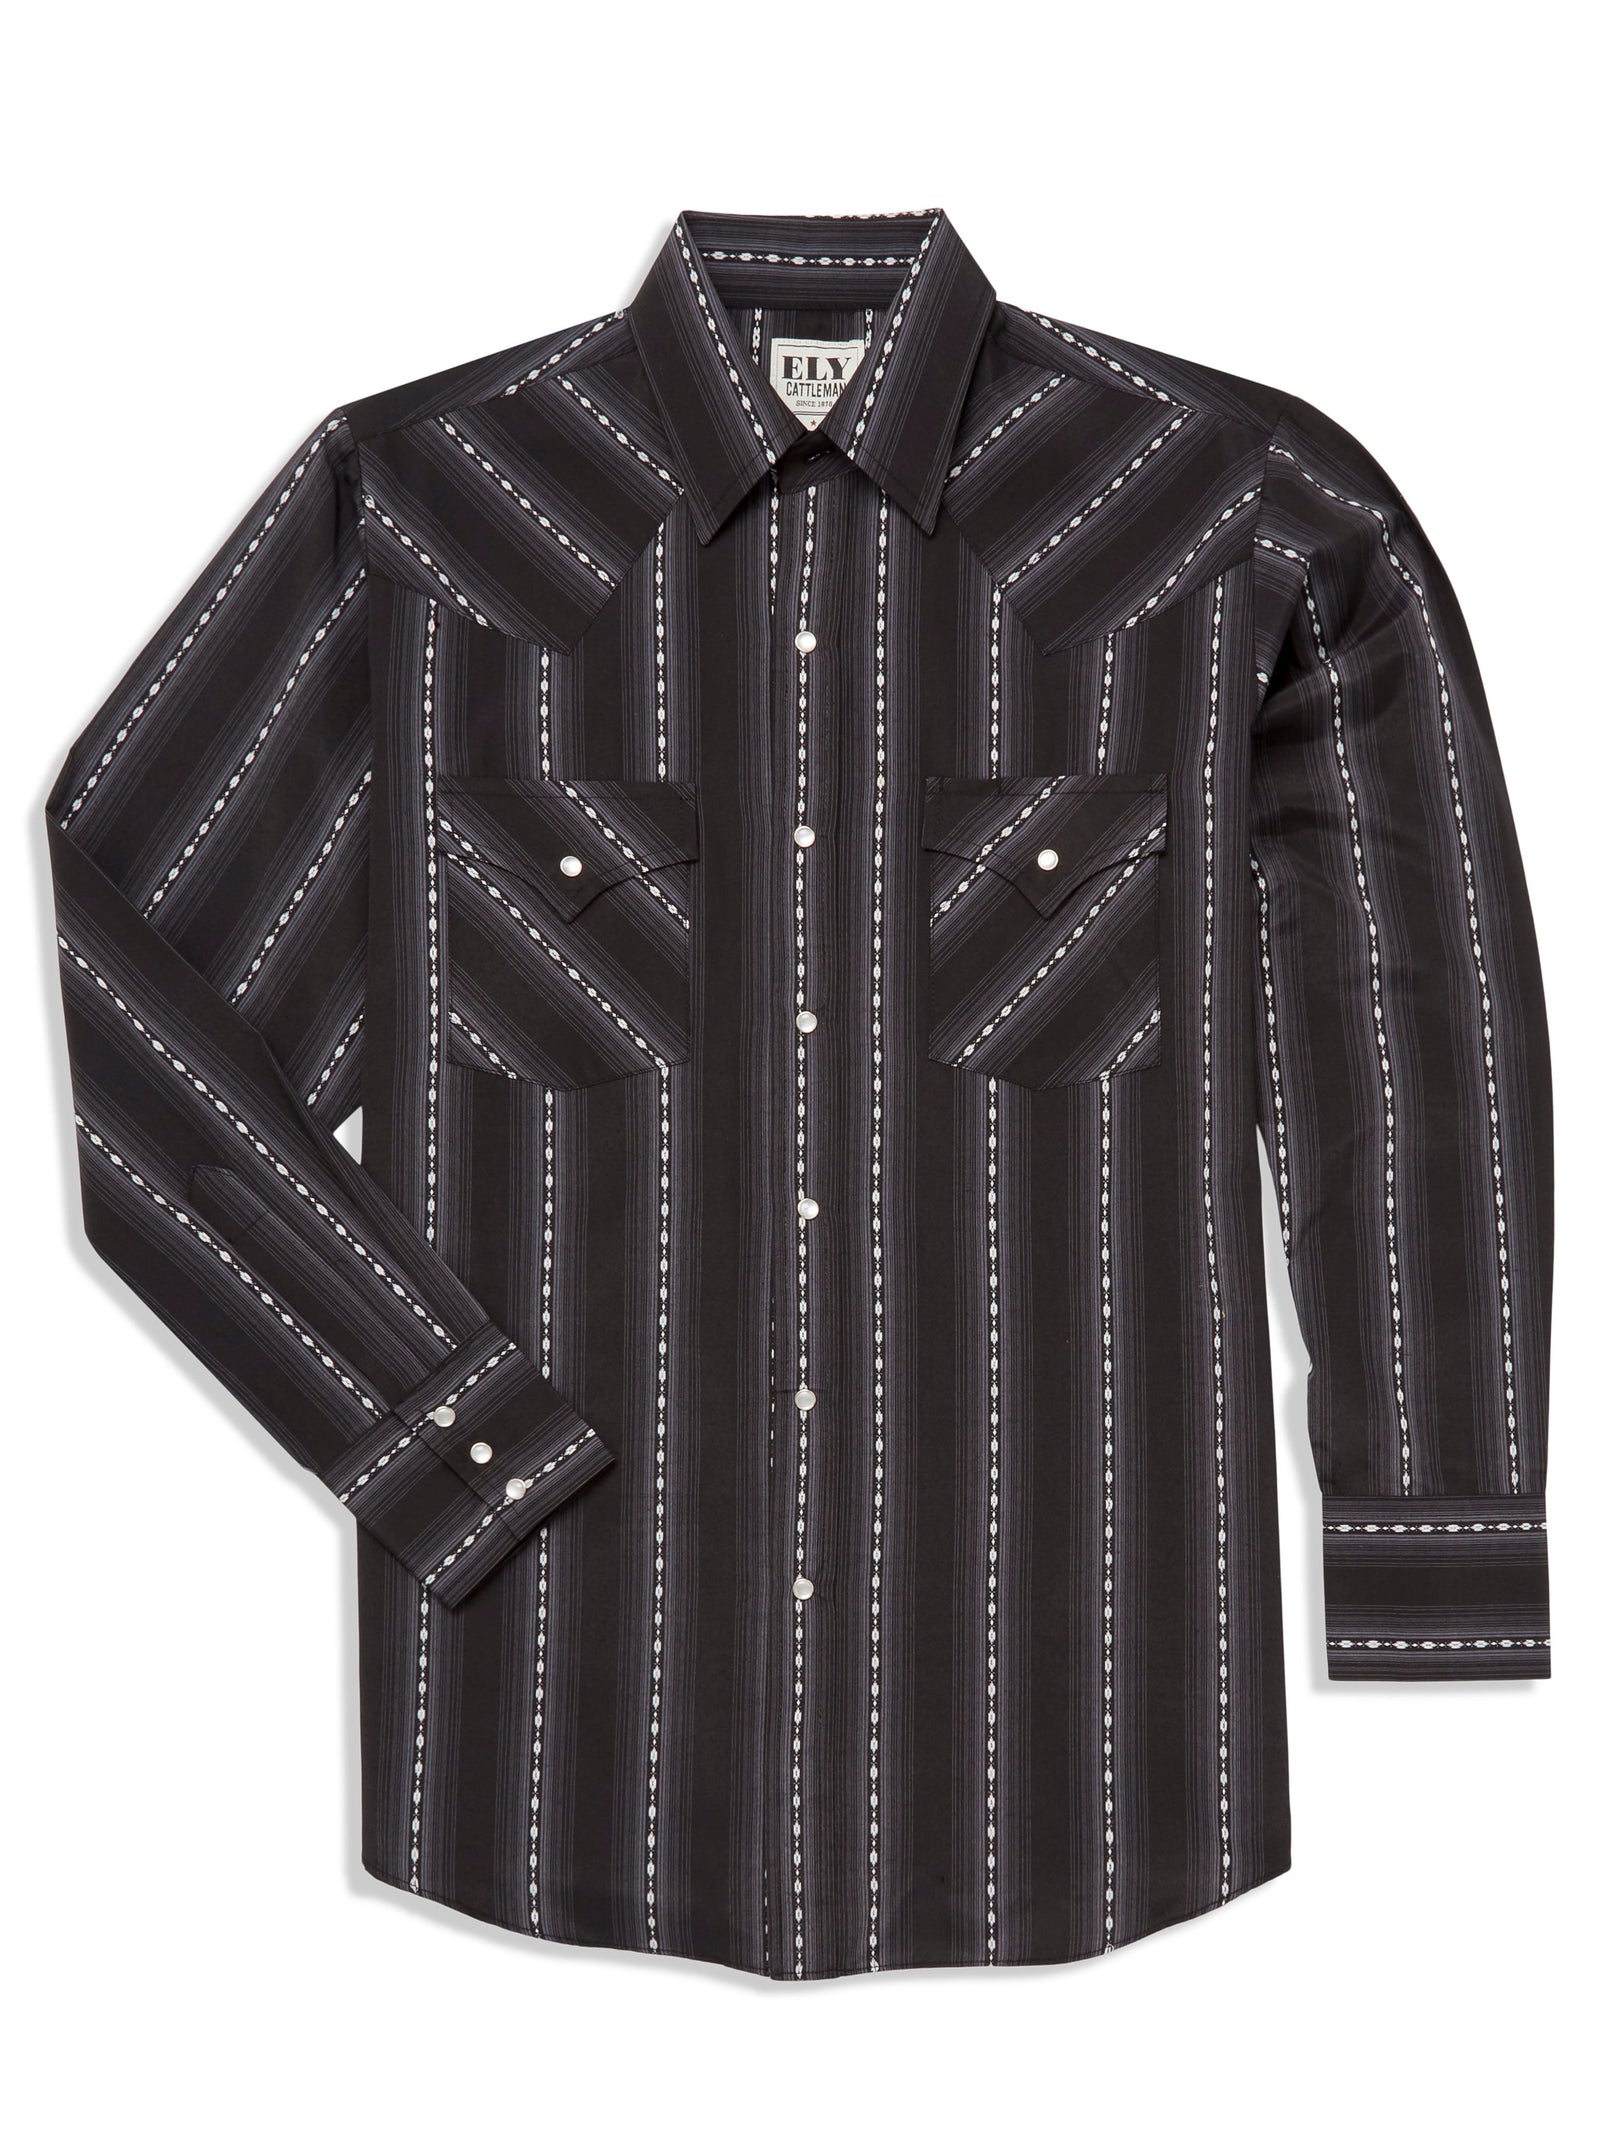 Ely Cattleman Men's Contrasting Piped Yoke Western Shirt - 15202980-89, Size: Small, Black